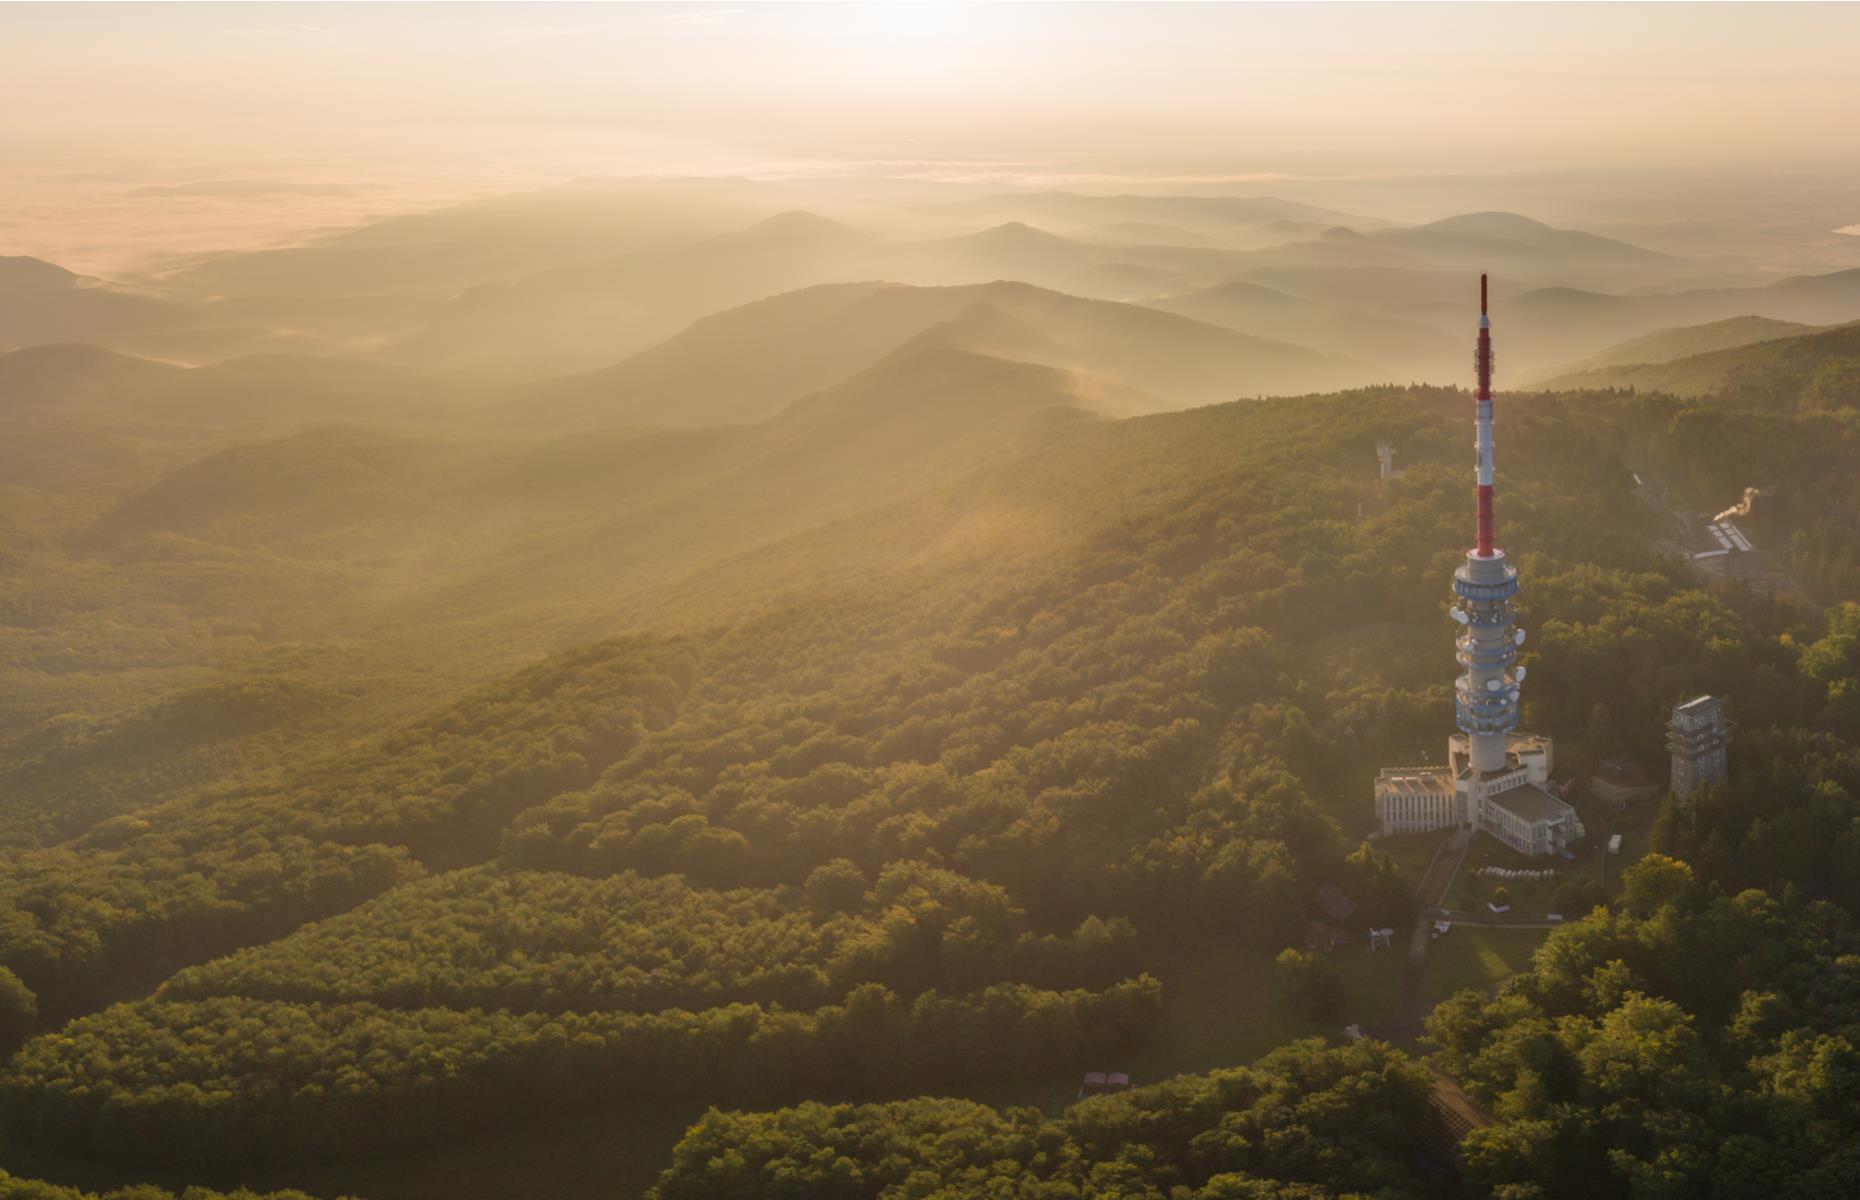 However, when you get to the top of Kékes, you can add another 577 feet (176m) to your altitude by riding the elevator to the top of the Soviet-era TV tower. Catch your breath and stop for a snack and a glass of local wine (produced on the sunnier side of Kékes) in the bar. If you come in winter, you can even ski down the mountain.